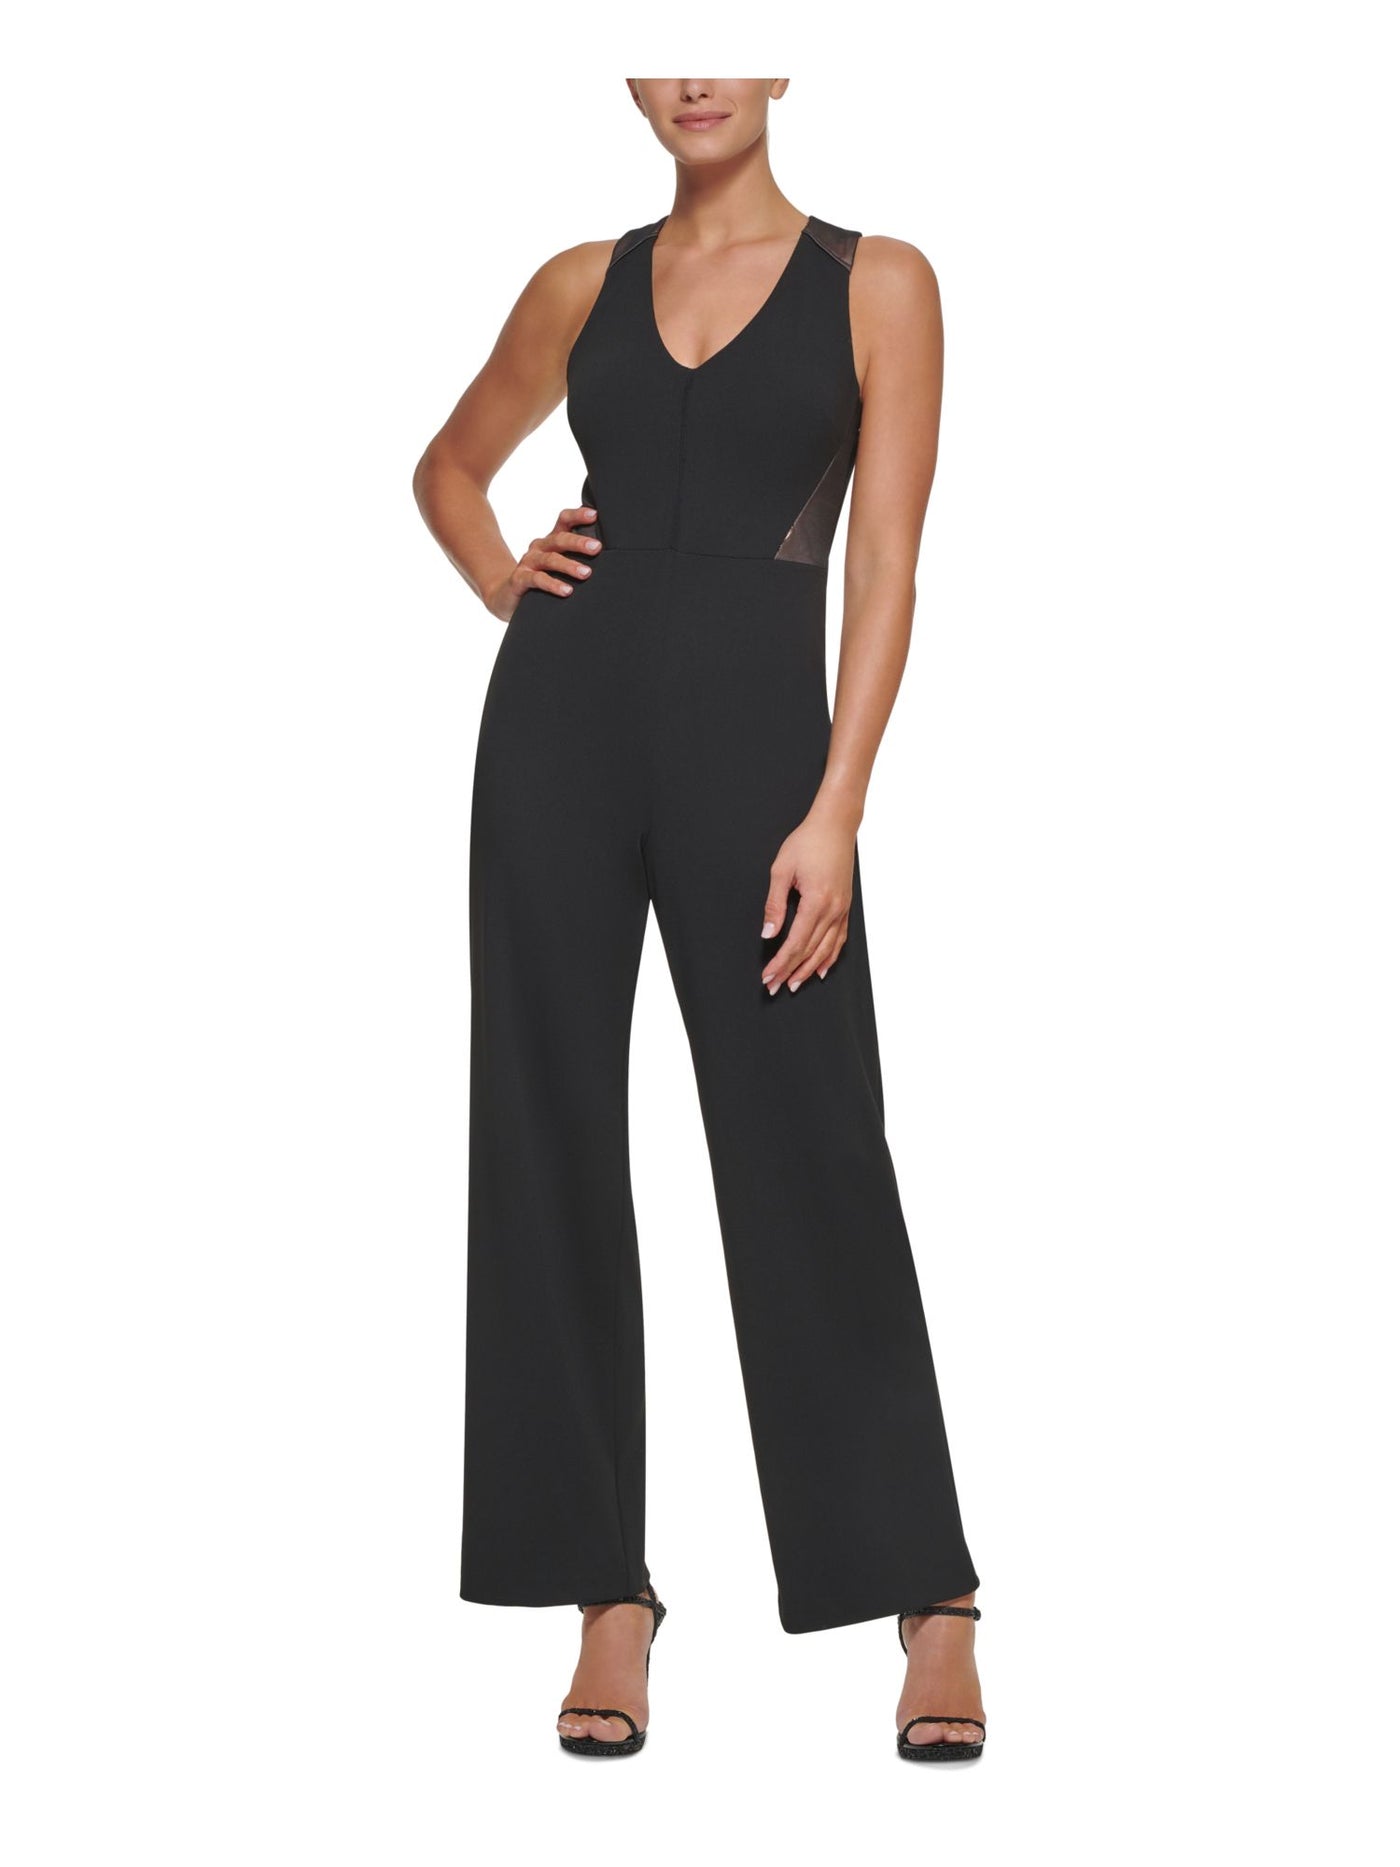 DKNY Womens Black Textured Zippered X Back With Keyhole Color Block Sleeveless V Neck Wide Leg Jumpsuit 4